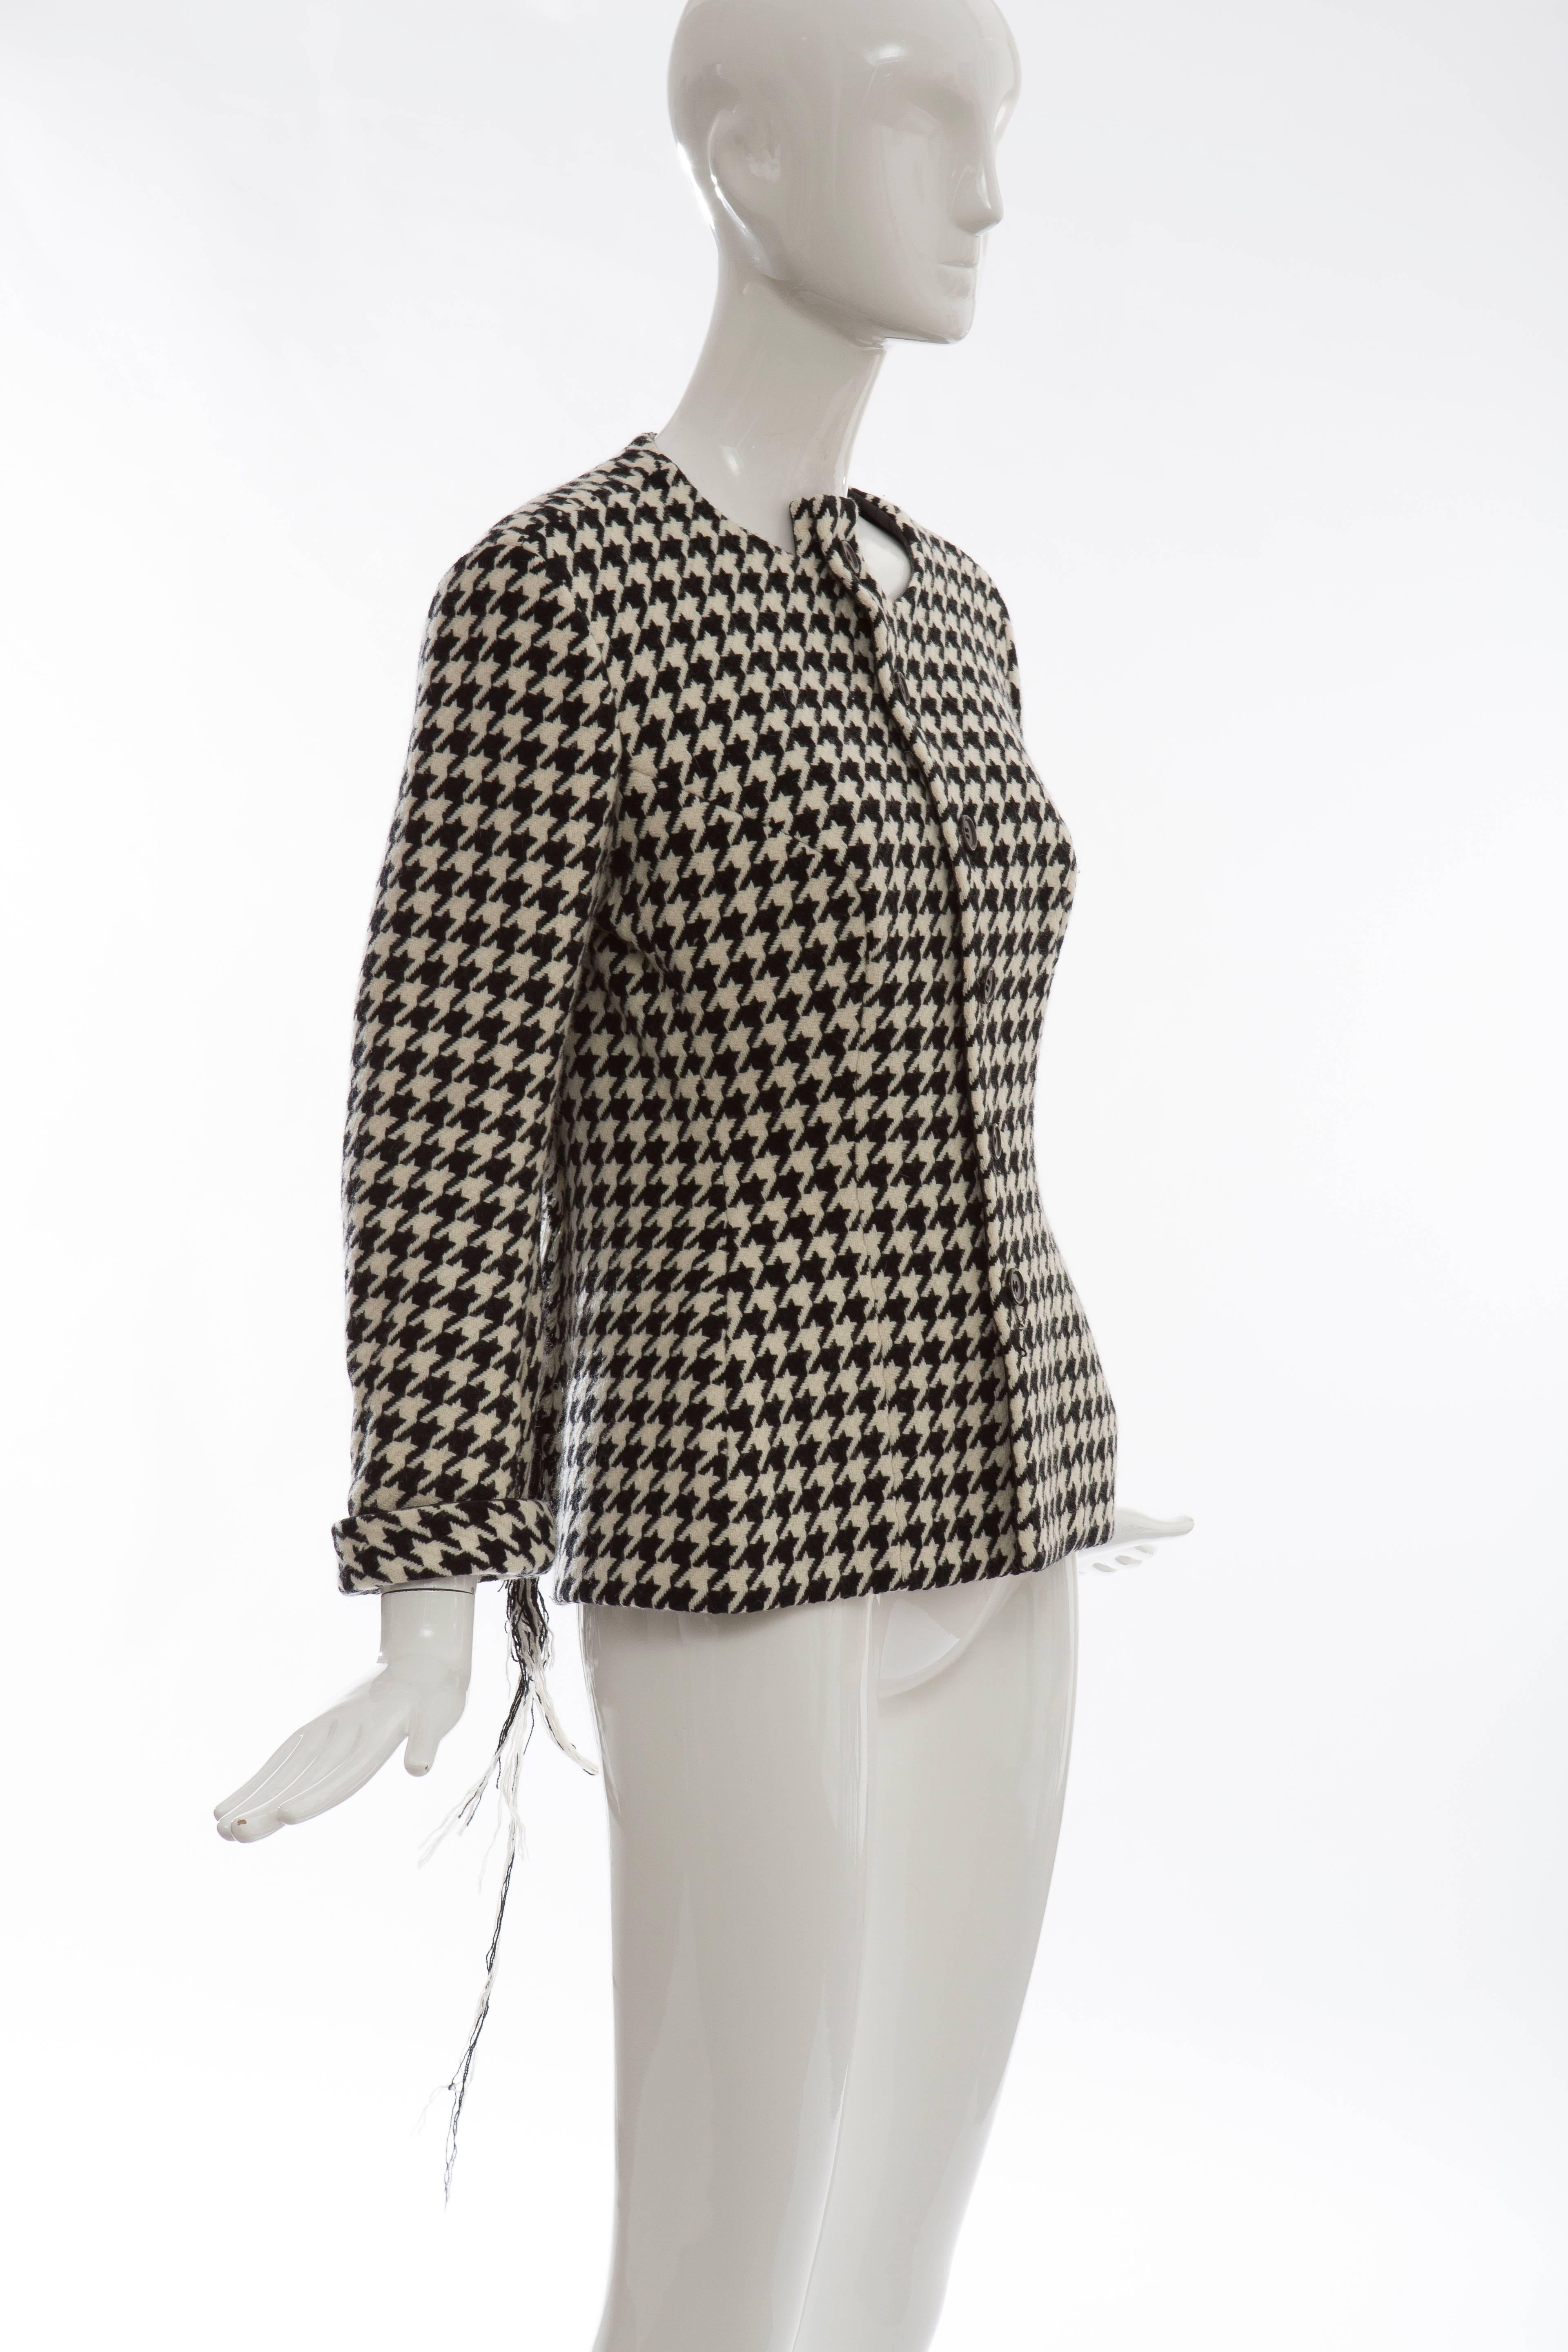 Women's Yohji Yamamoto Wool Houndstooth Jacket With Leather Trim, Autumn / Winter 2003 For Sale